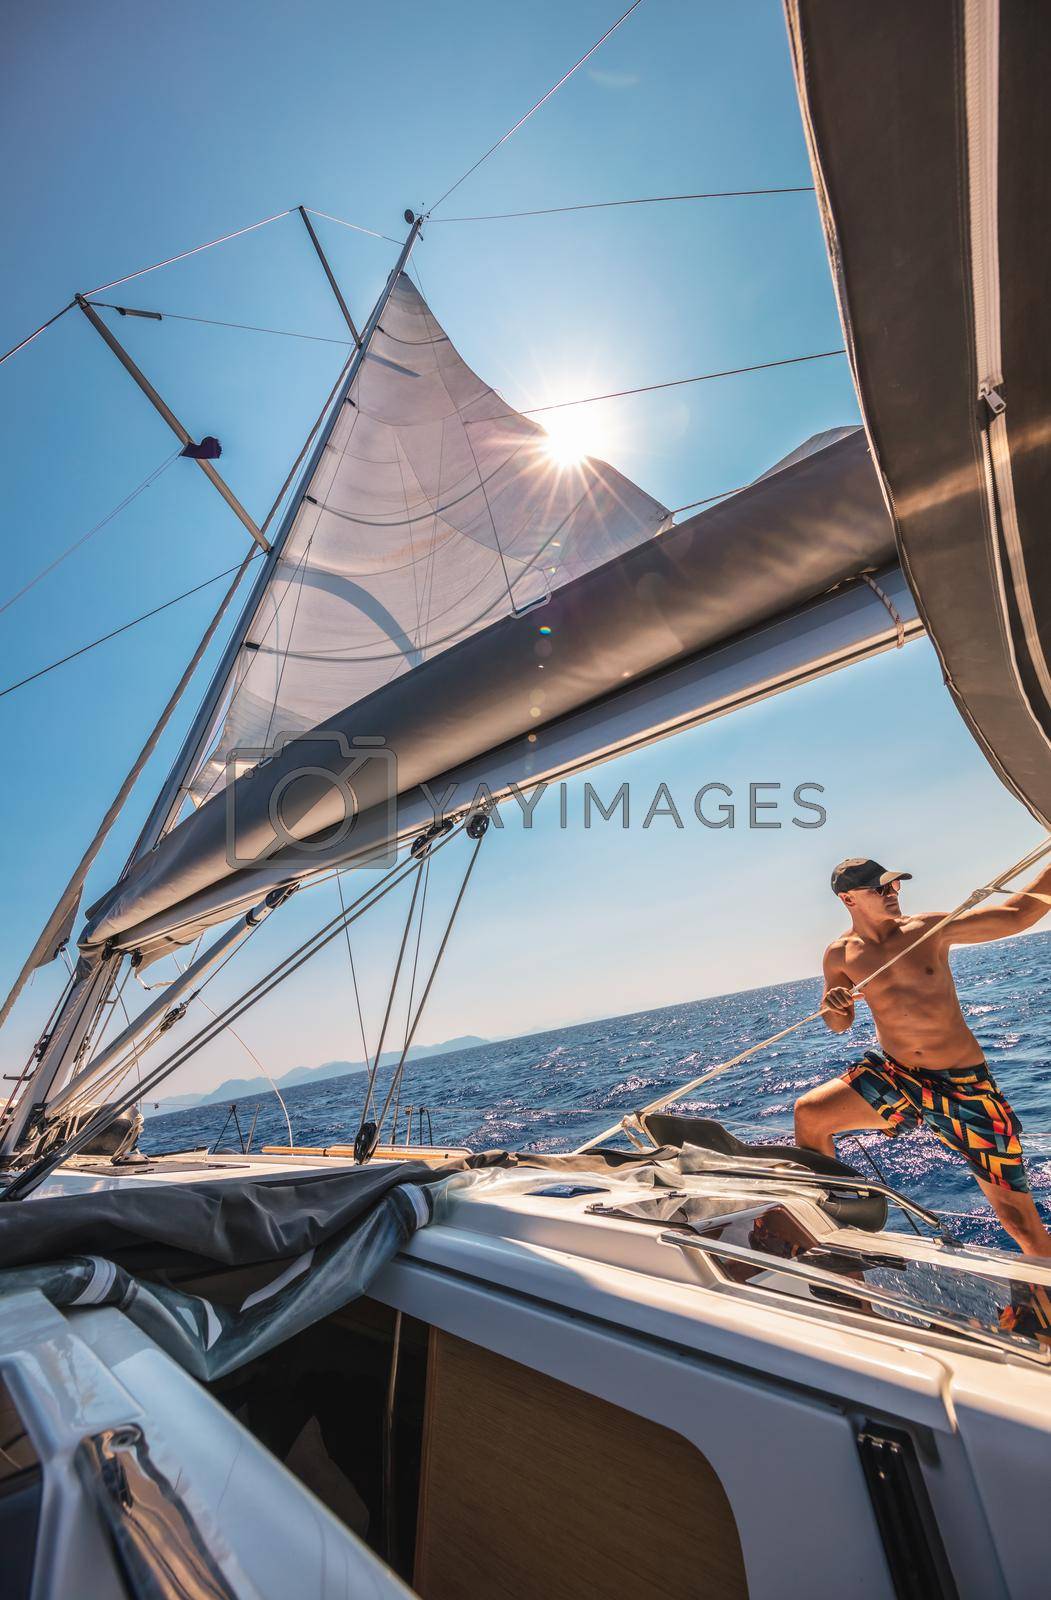 Royalty free image of Enjoying Sailing in the Sea by Anna_Omelchenko